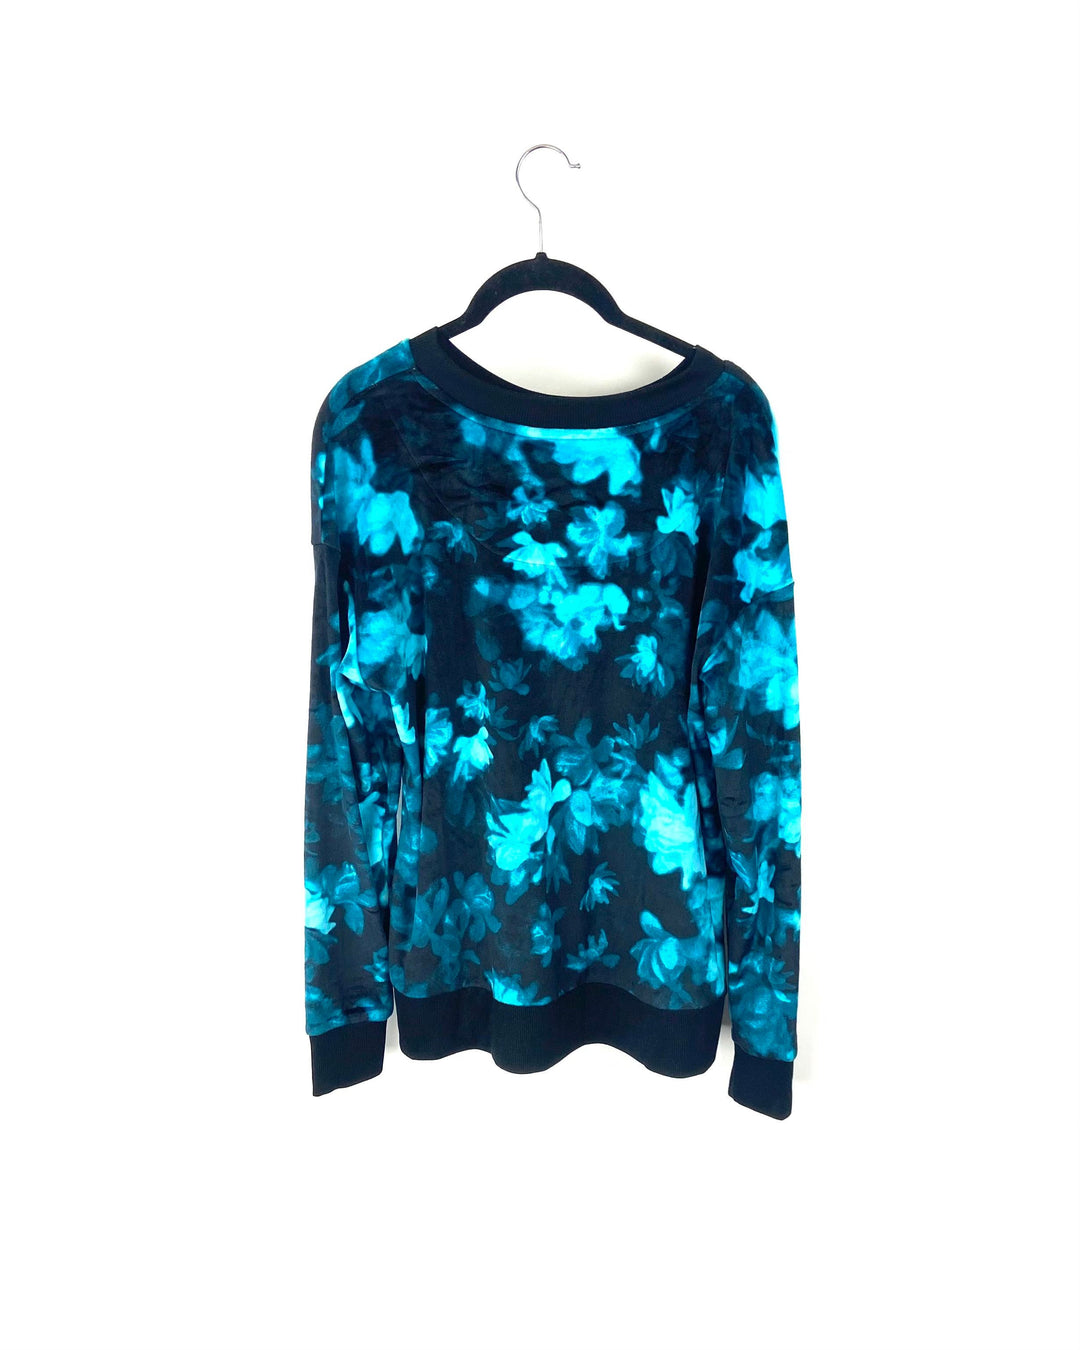 Blue And Black Fleece Top - Small